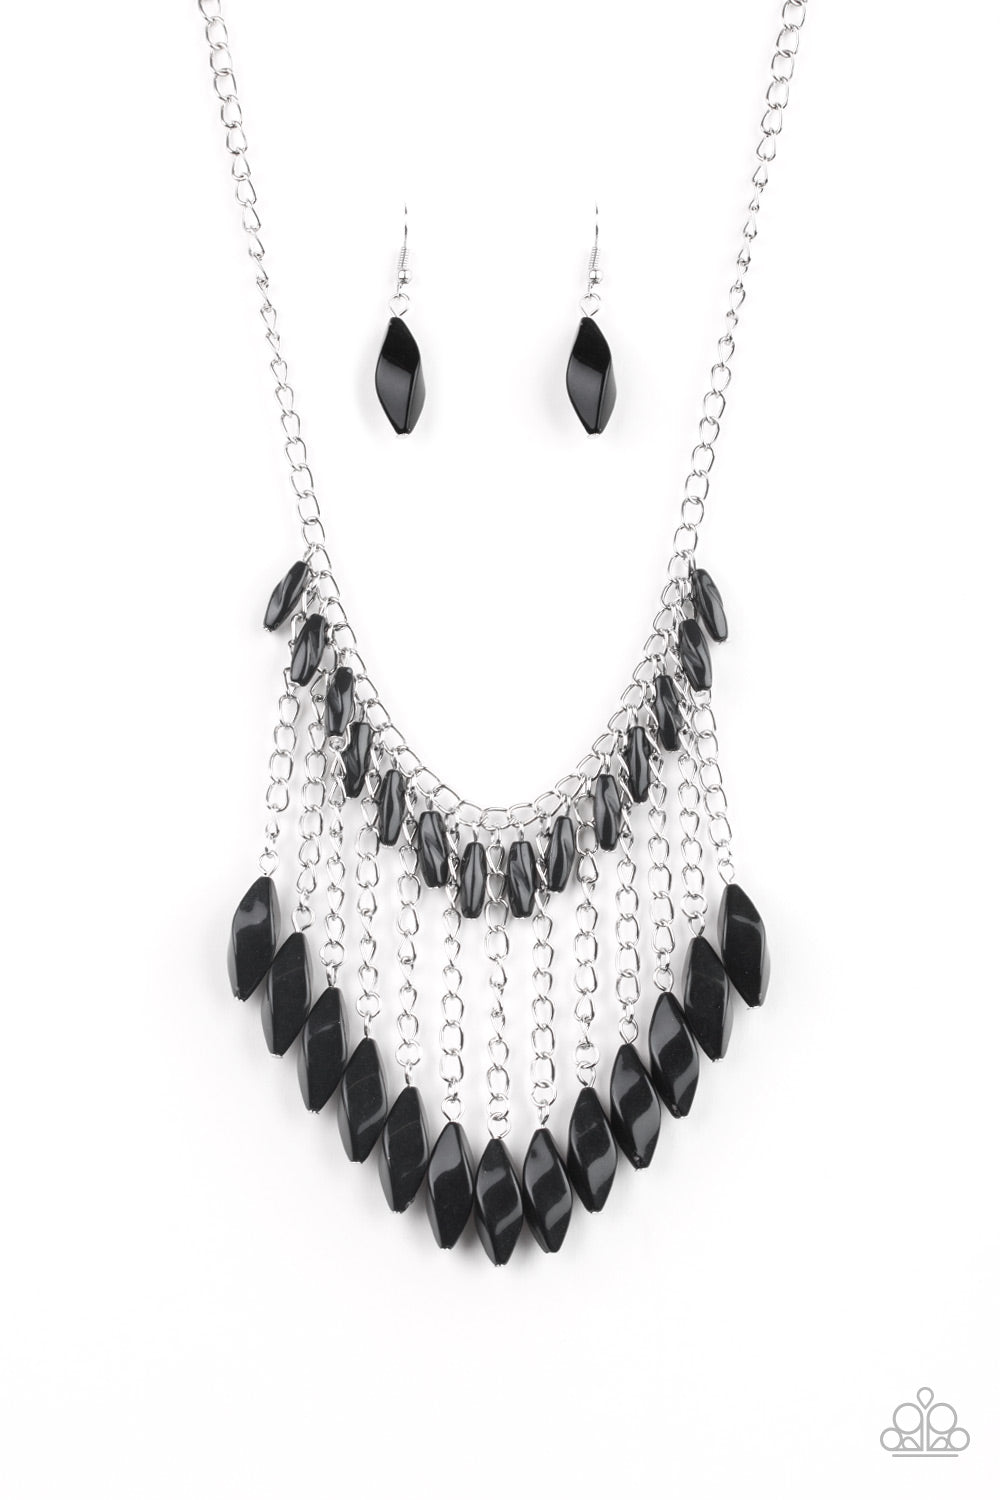 Venturous Vibes - Black and Silver Necklace - Paparazzi Accessories - A row of faceted black beads swing from the bottom of a shimmery silver chain below the collar. Larger black beads cascade from the bottoms of free-falling silver chains, creating a vivacious fringe.